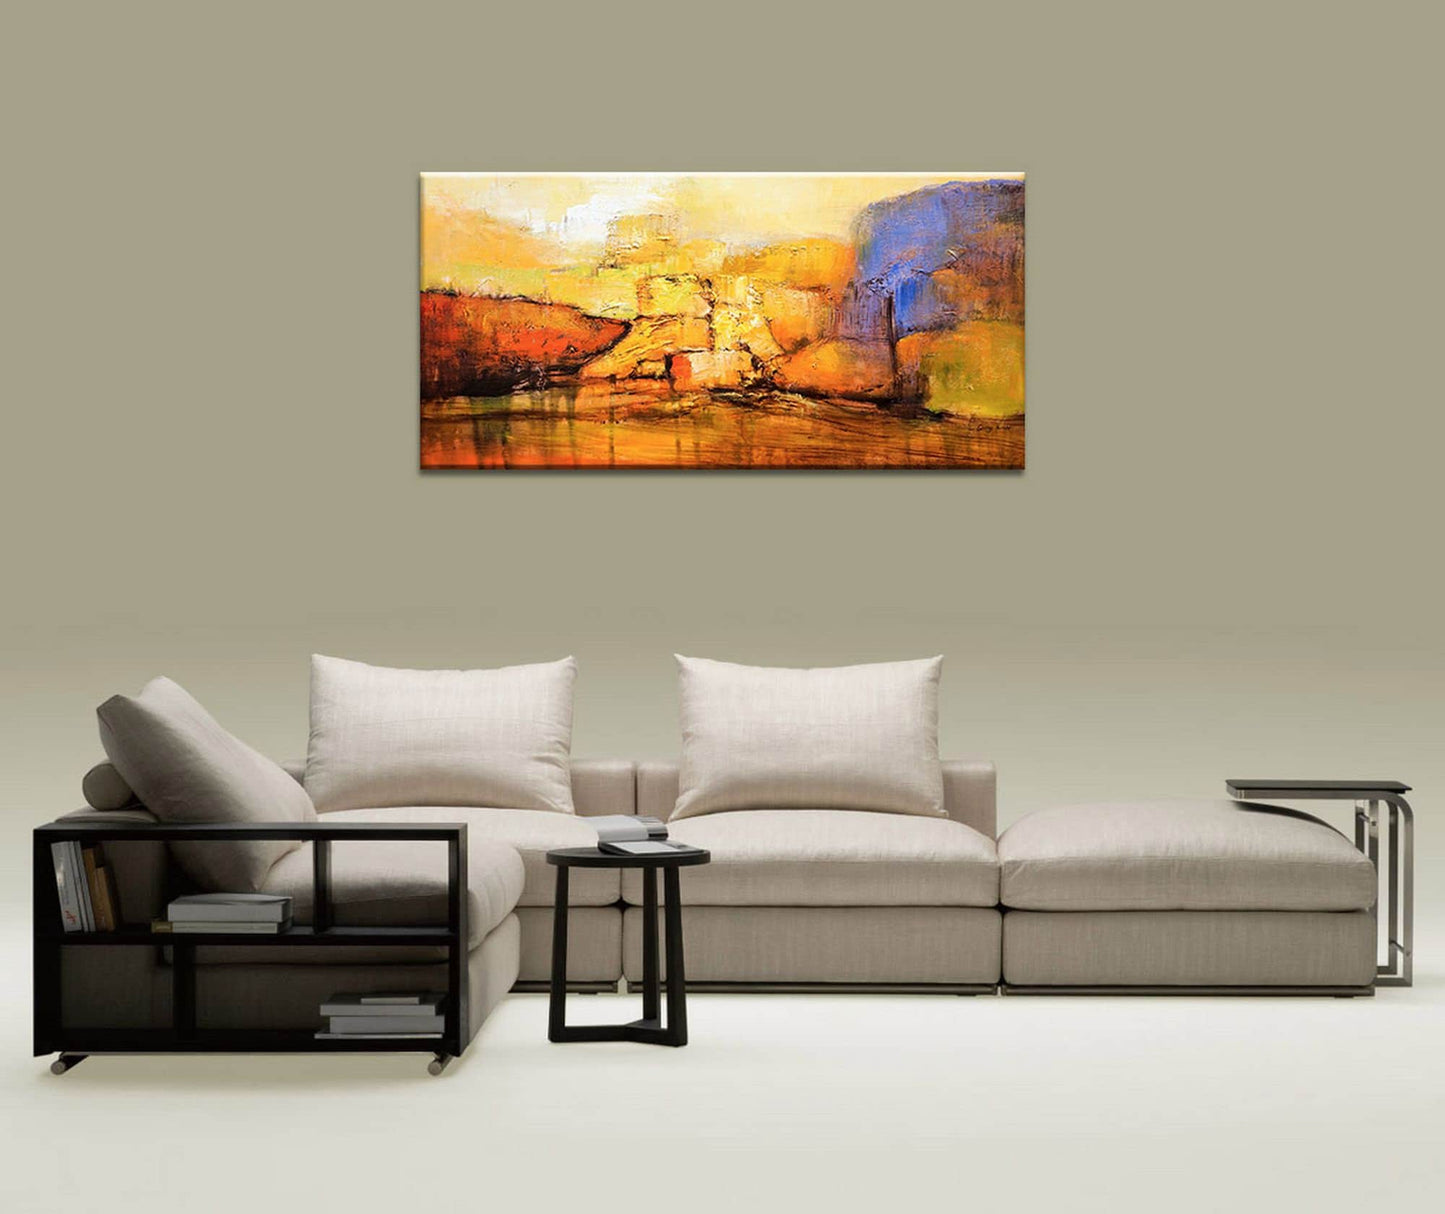 Contemporary Painting, Dorm Decor Canvas Art, Family Wall Decor, Oil Painting Abstract, Canvas Painting, Original Art, Large Oil Painting